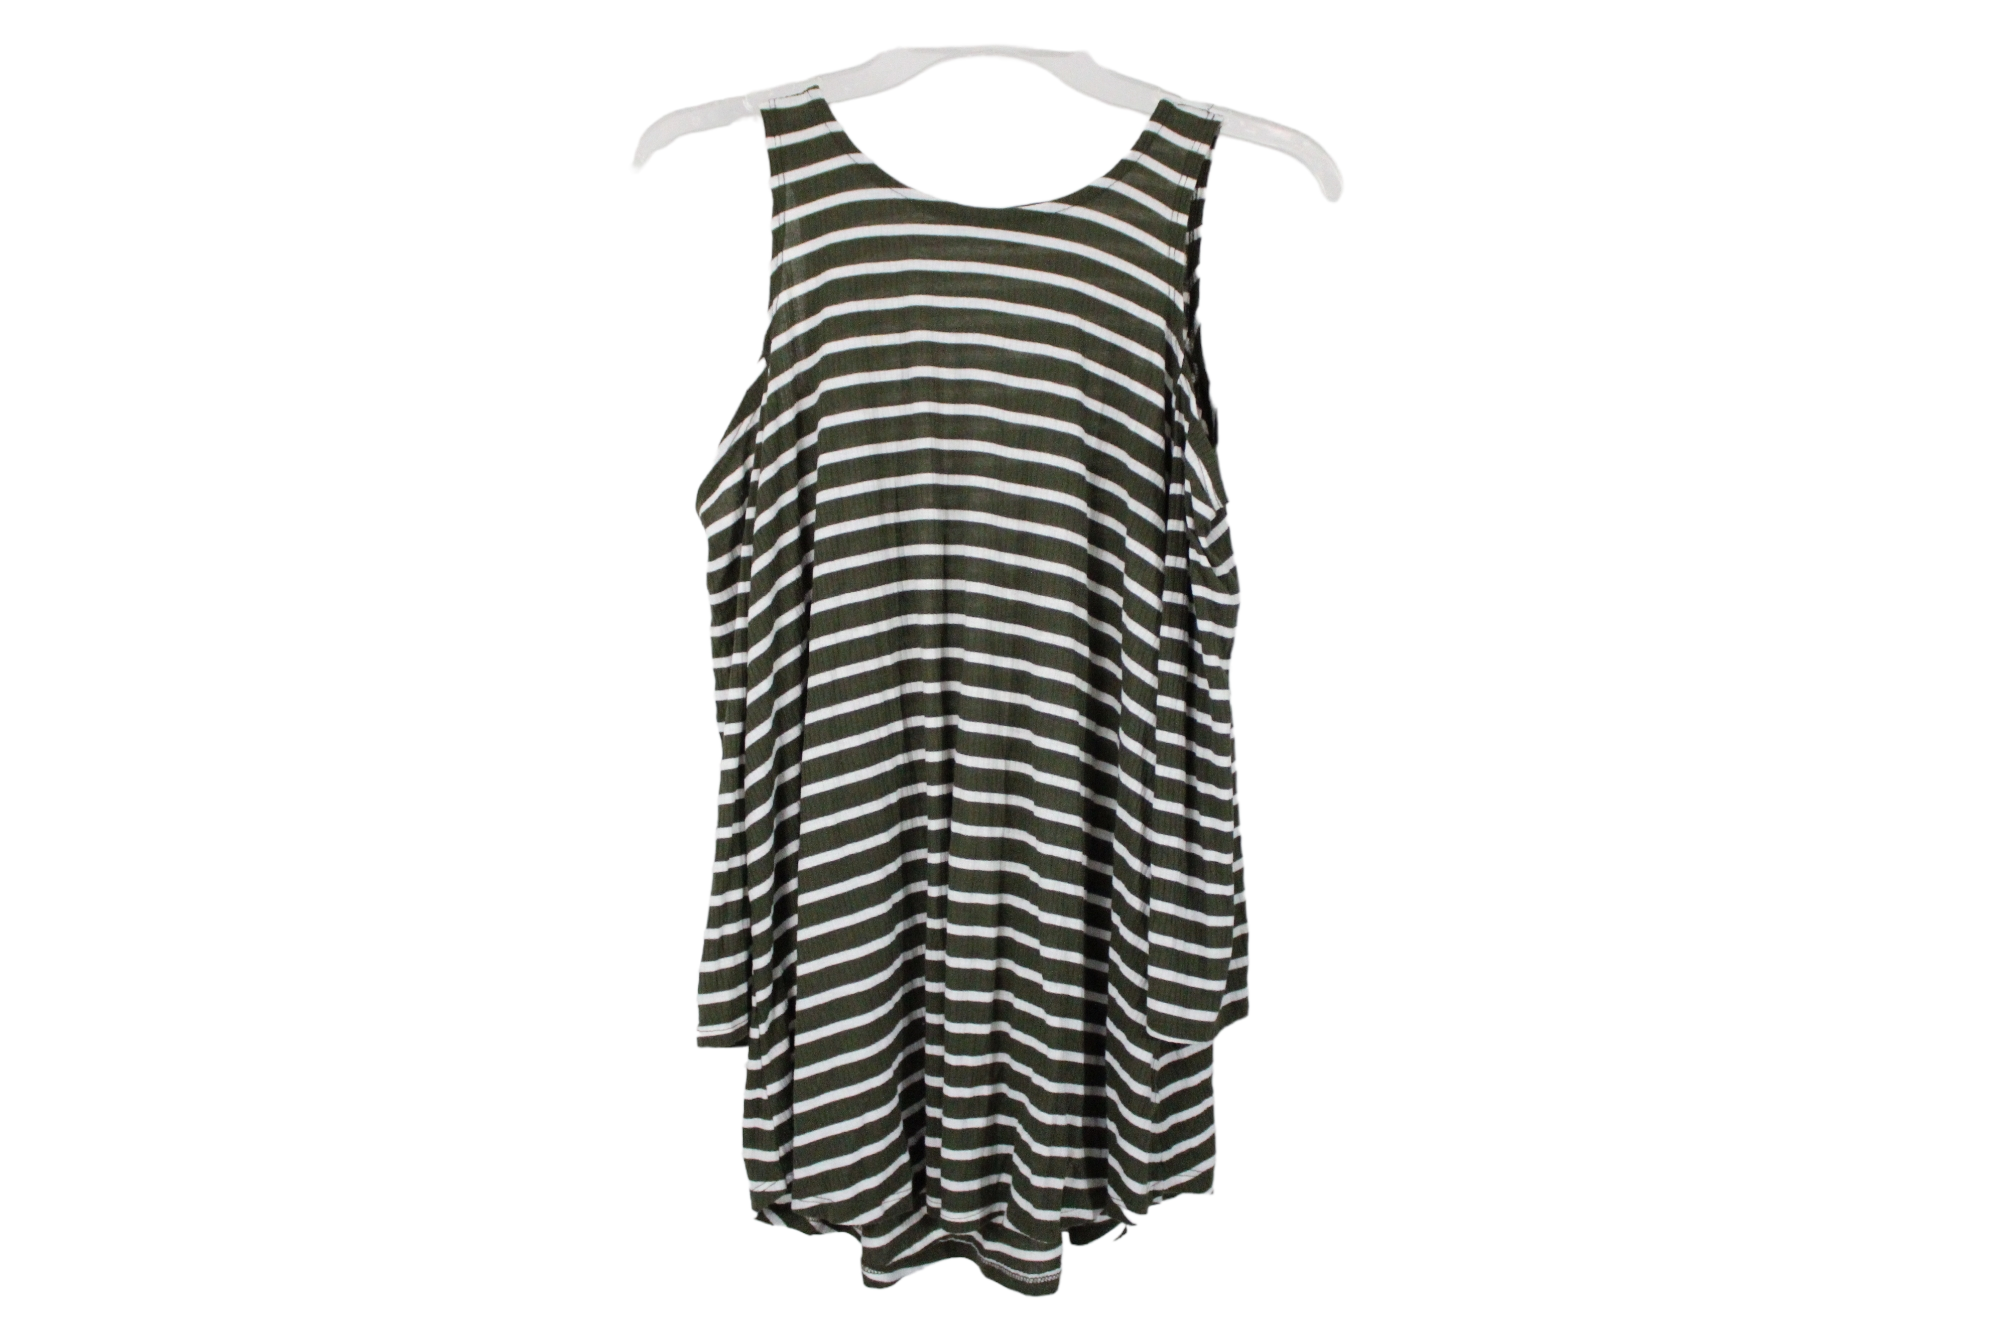 One Clothing Green Striped Cold Shoulder Top | M